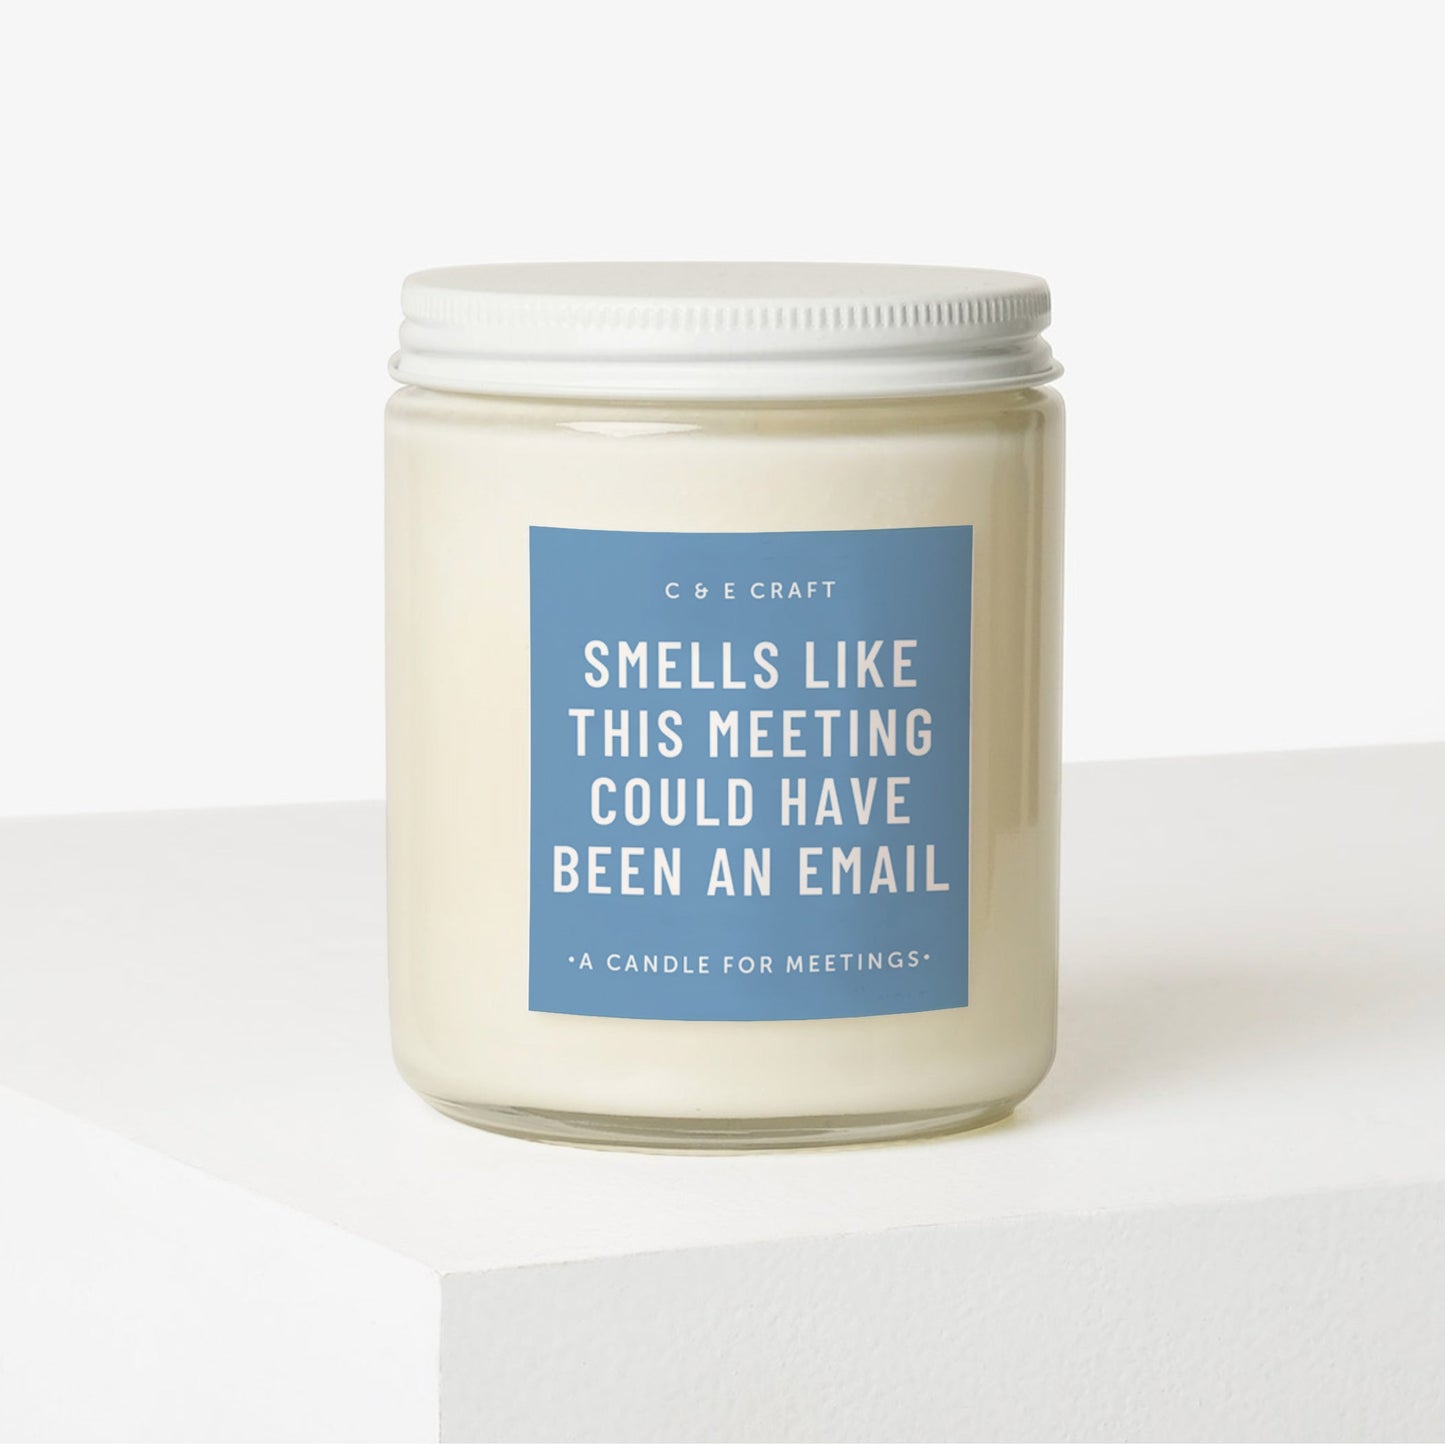 Smells Like This Meeting Could Have Been An Email Candle C & E Craft Co 